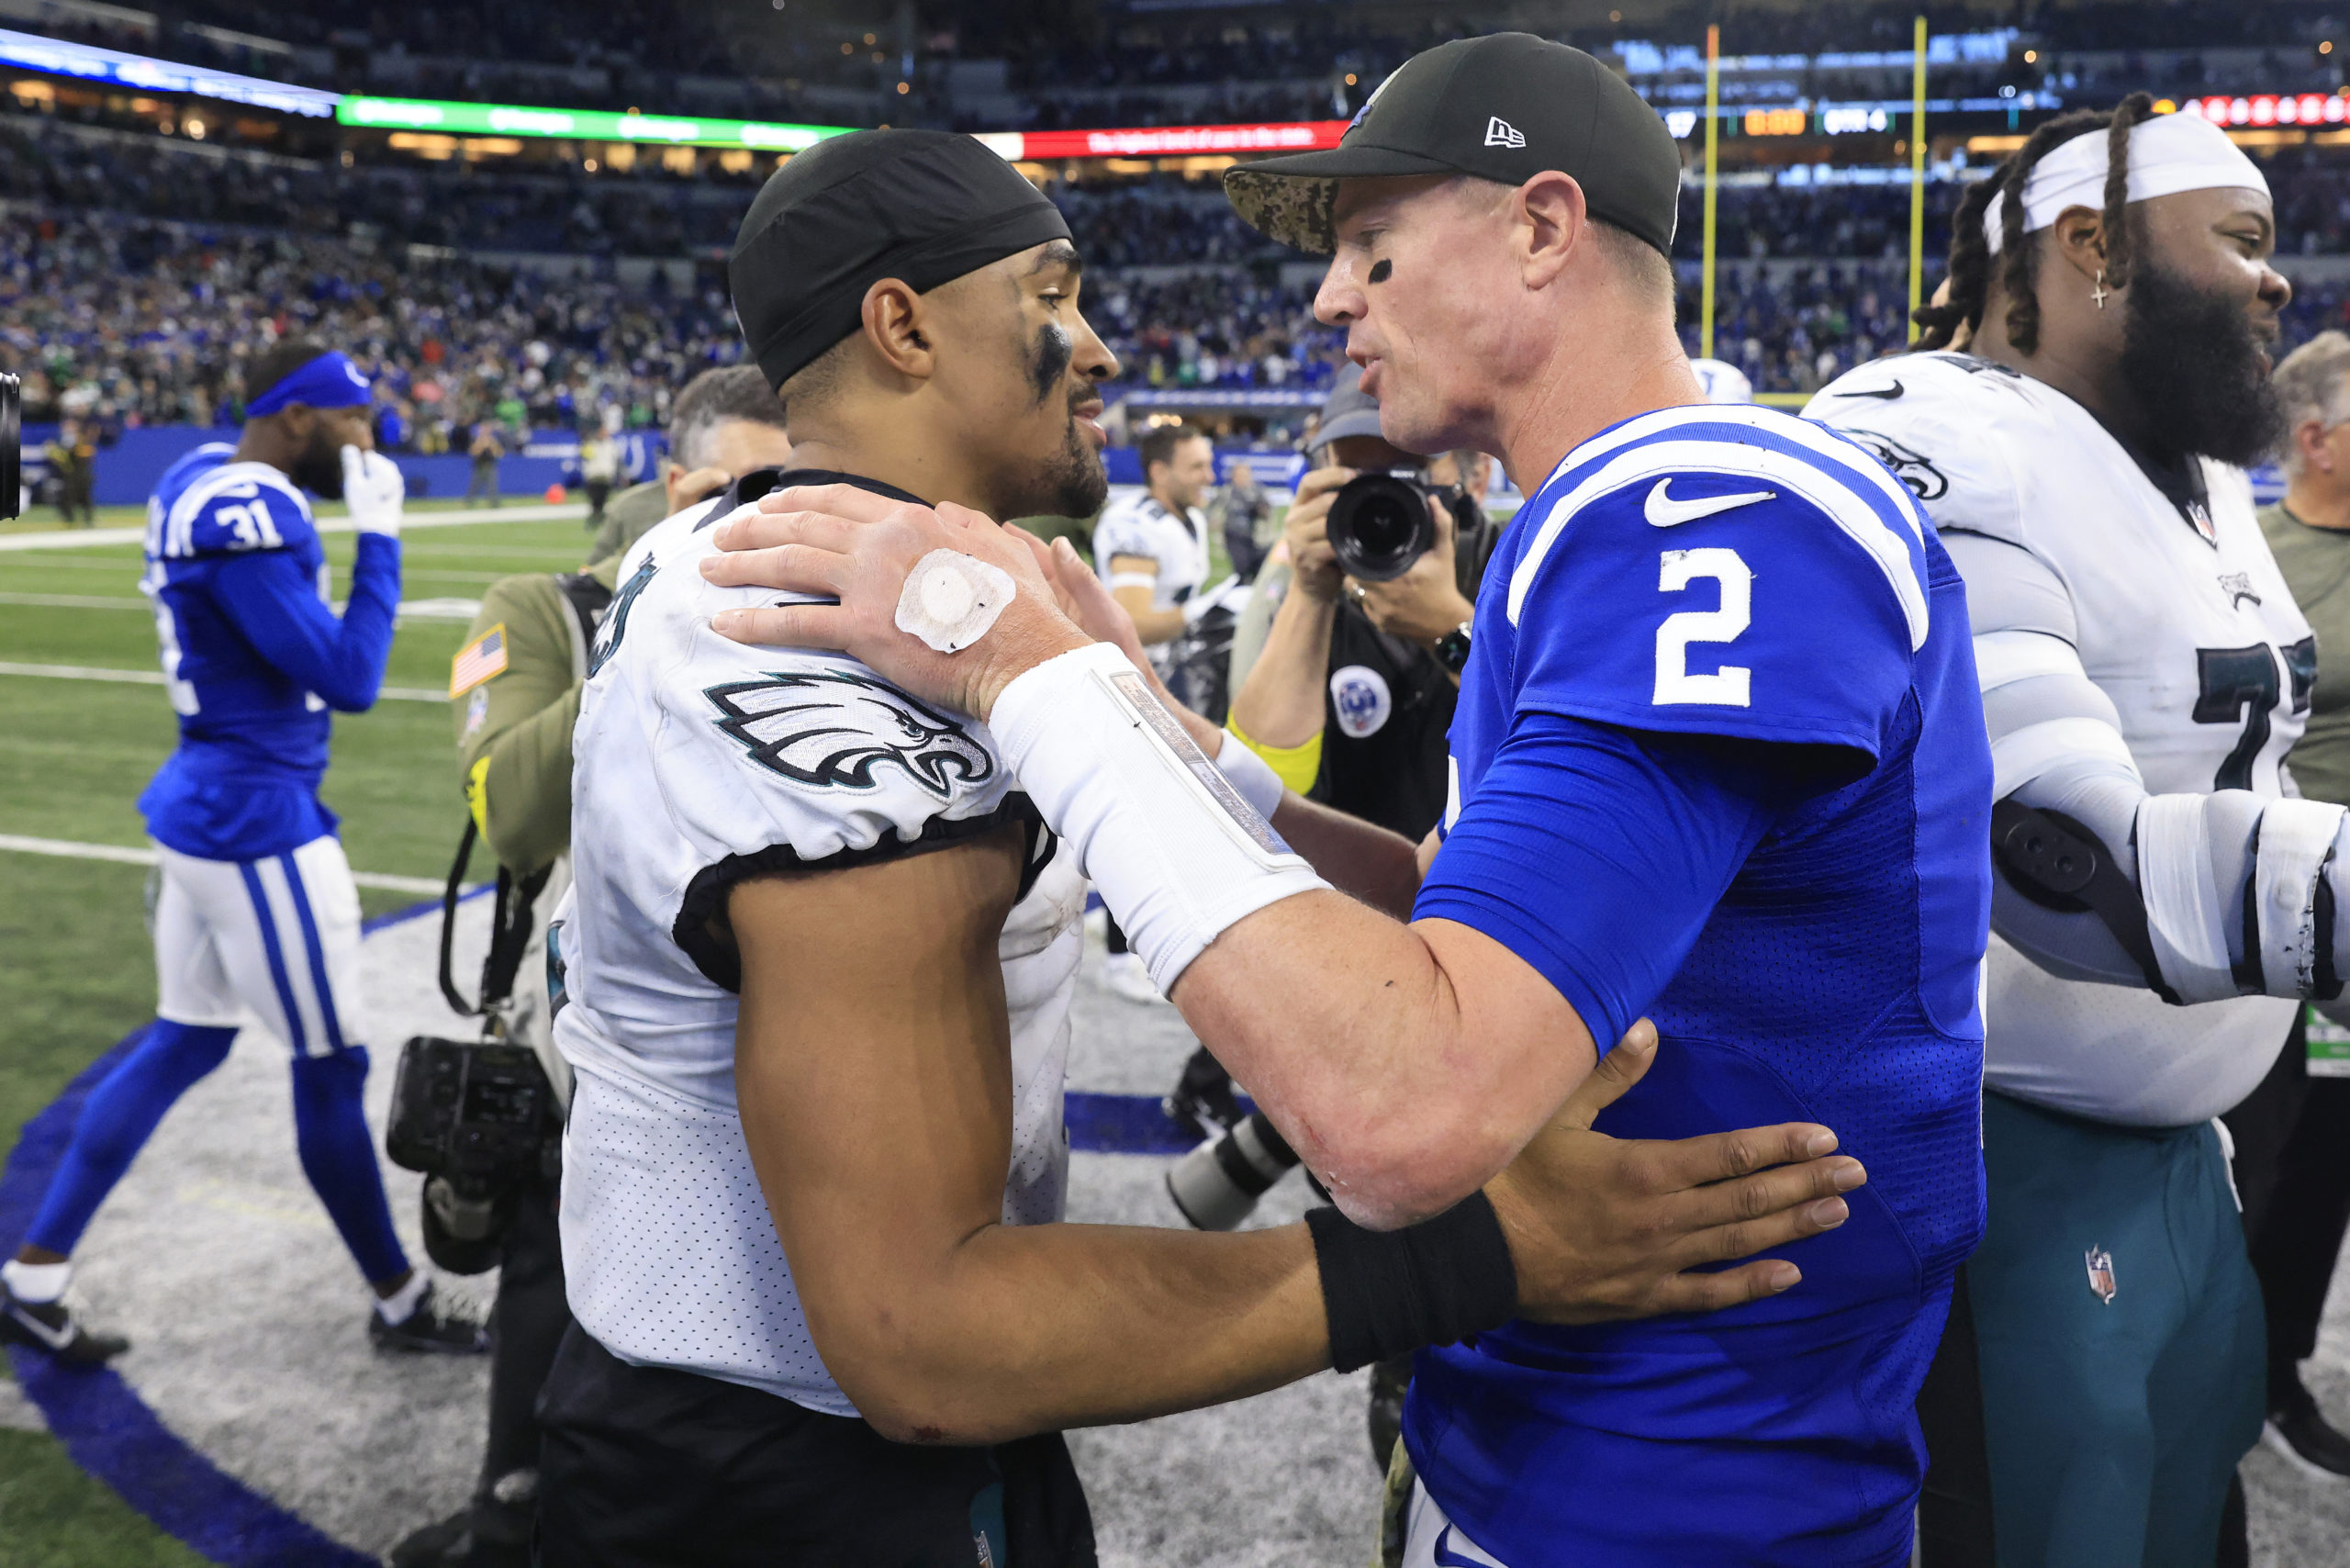 INDIANAPOLIS, INDIANA - NOVEMBER 20: Jalen Hurts #1 of the Philadelphia Eagles and Matt Ryan #2 of the Indianapolis Colts talk after Philadelphia's 17-16 win at Lucas Oil Stadium on November 20, 2022 in Indianapolis, Indiana. Justin Casterline/Getty Images